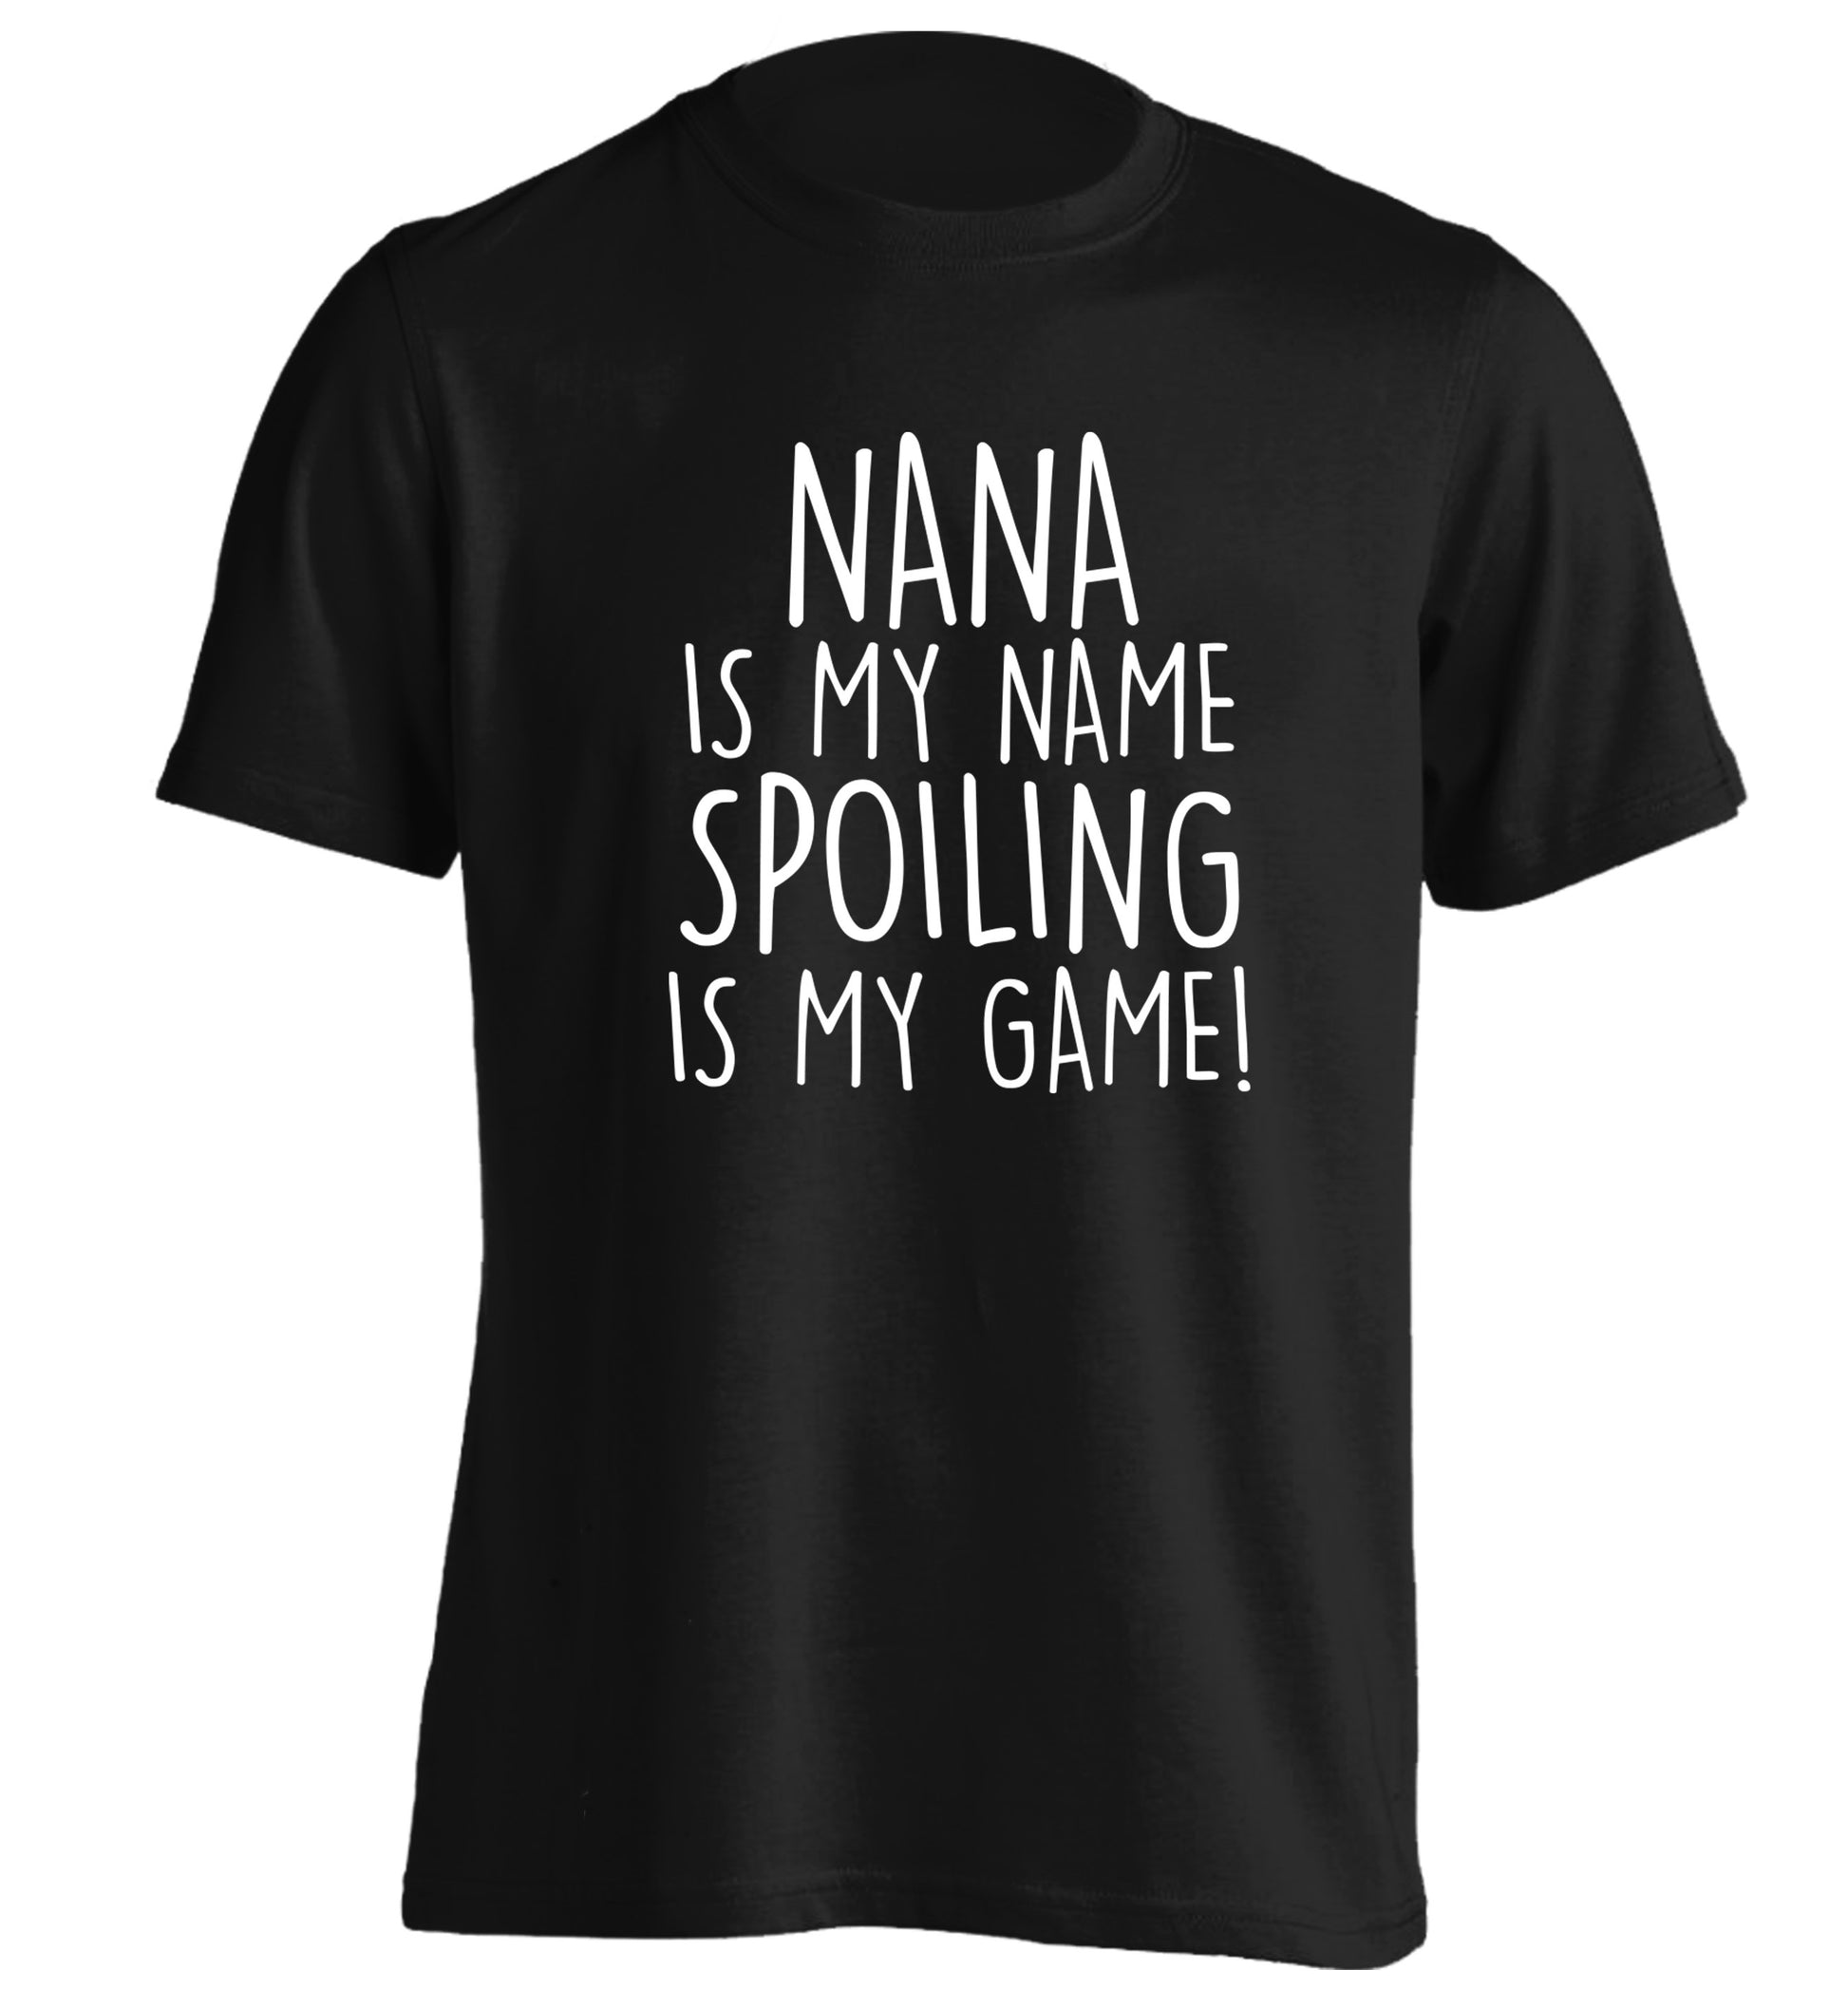 Nana is my name, spoiling is my game adults unisex black Tshirt 2XL